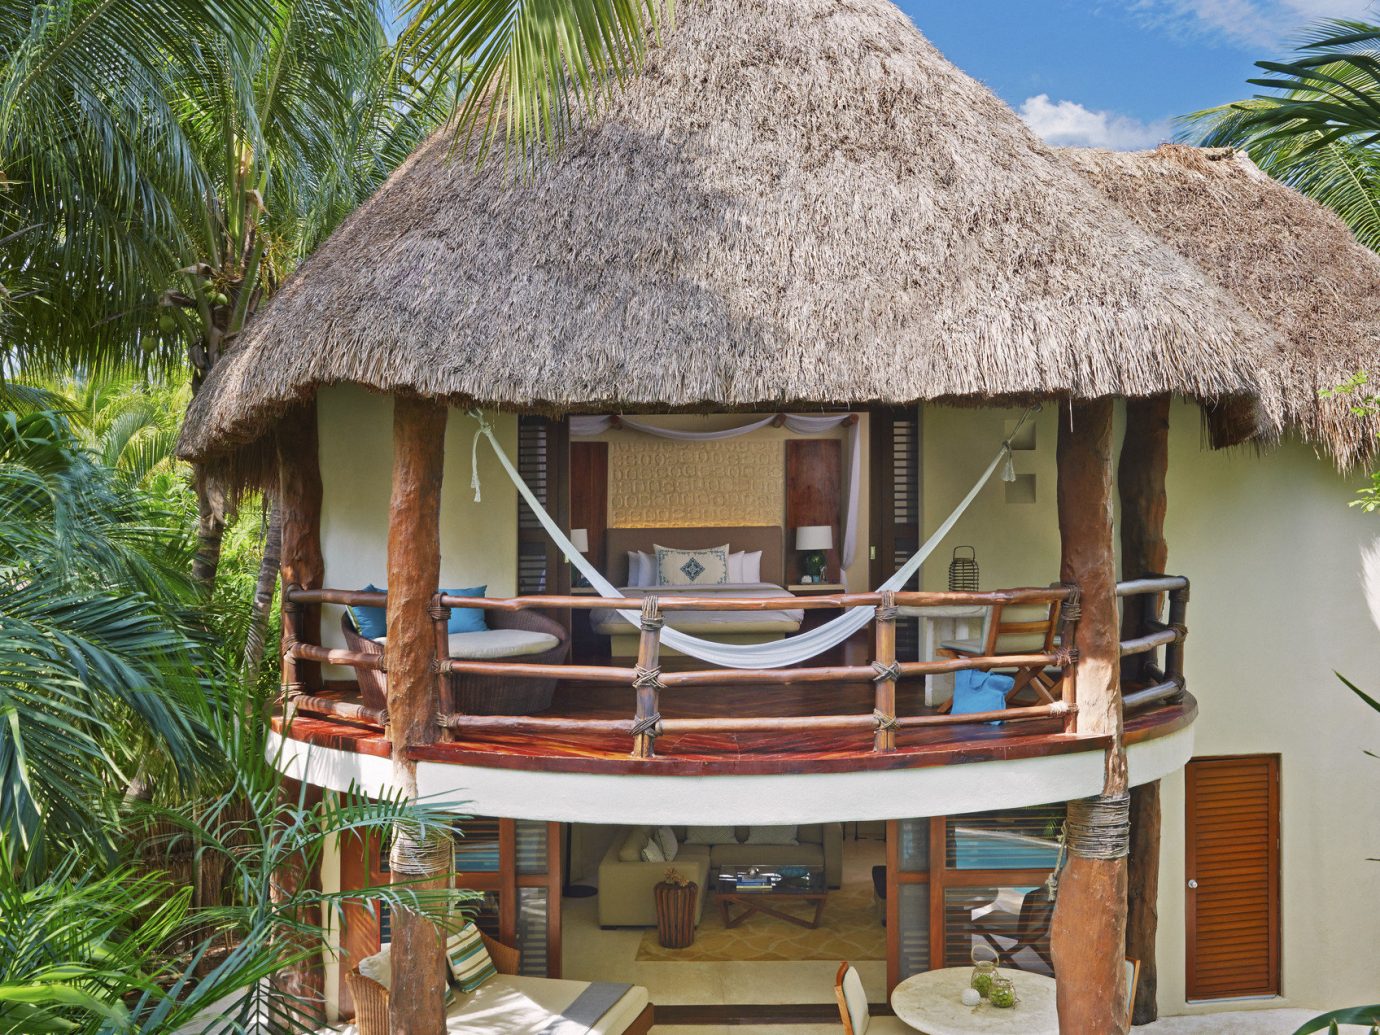 Beach Honeymoon Hotels Mexico Romance Tulum tree outdoor chair property Resort hut thatching cottage roof Jungle area furniture surrounded